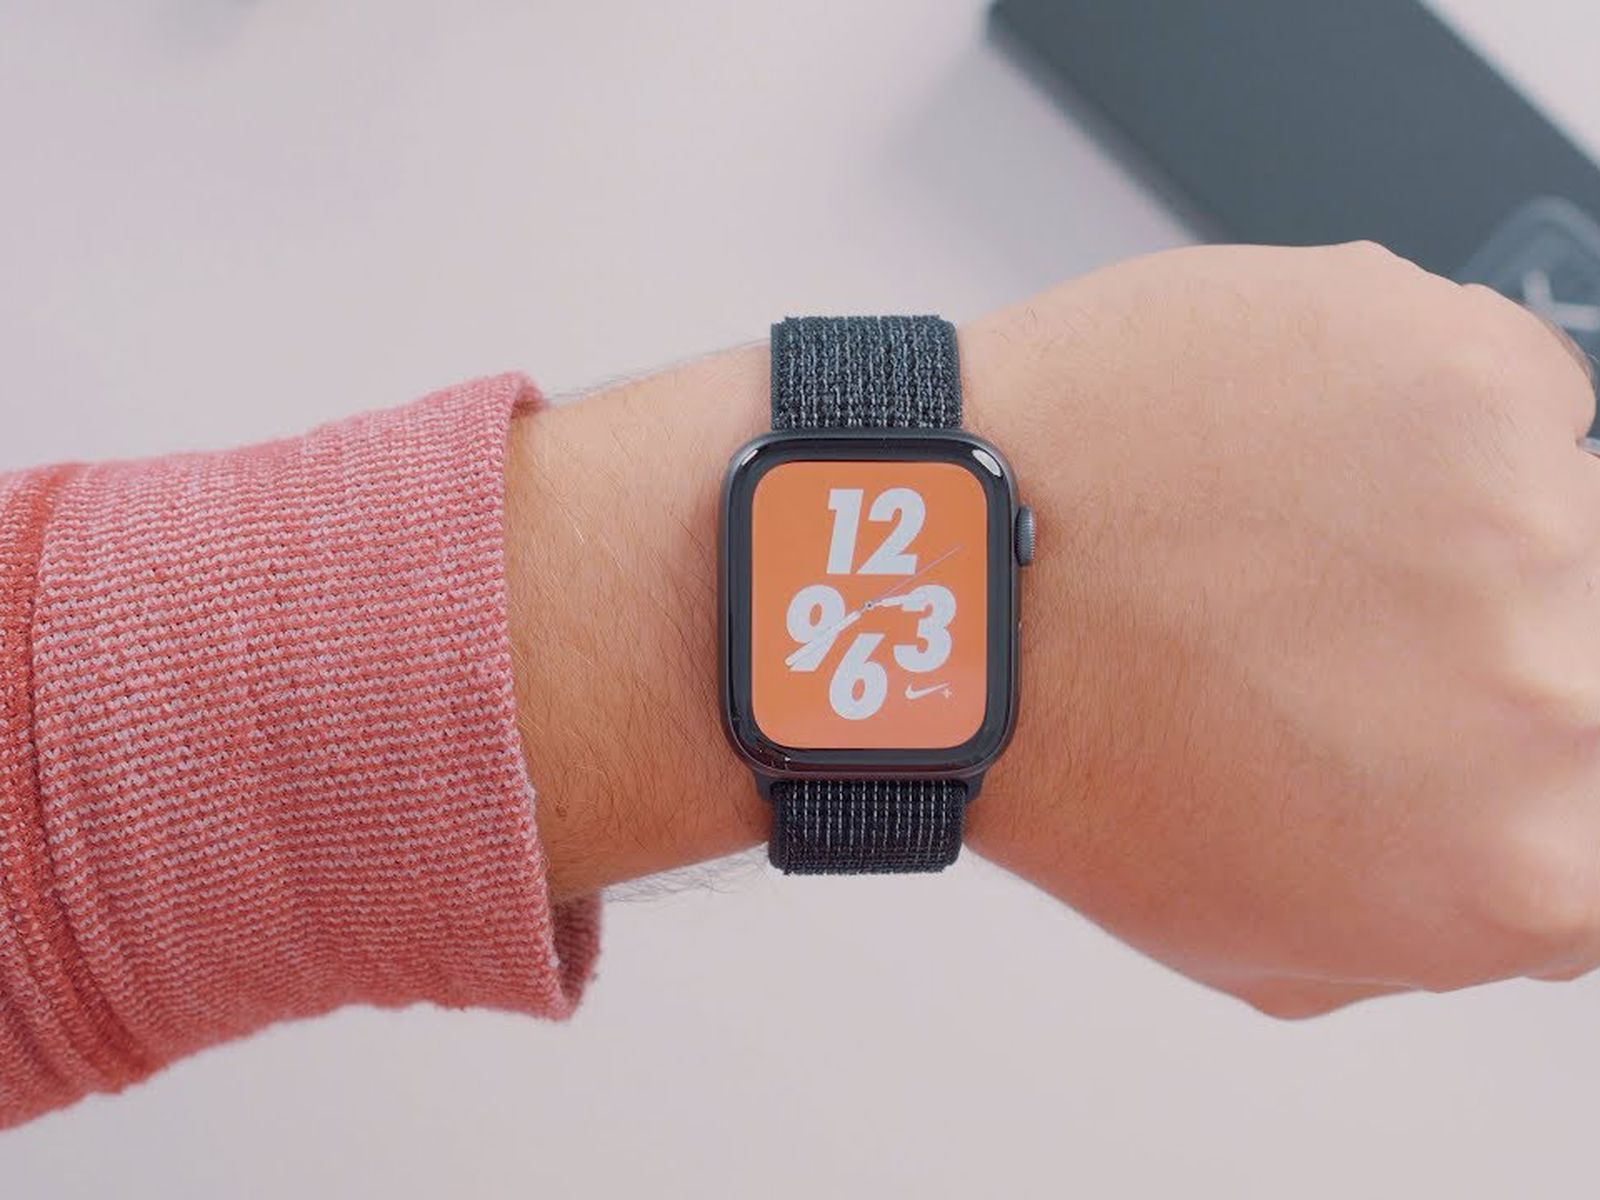 Thanksgiving Andesbjergene Synslinie Hands-On With the New Nike+ Apple Watch Series 4 - MacRumors